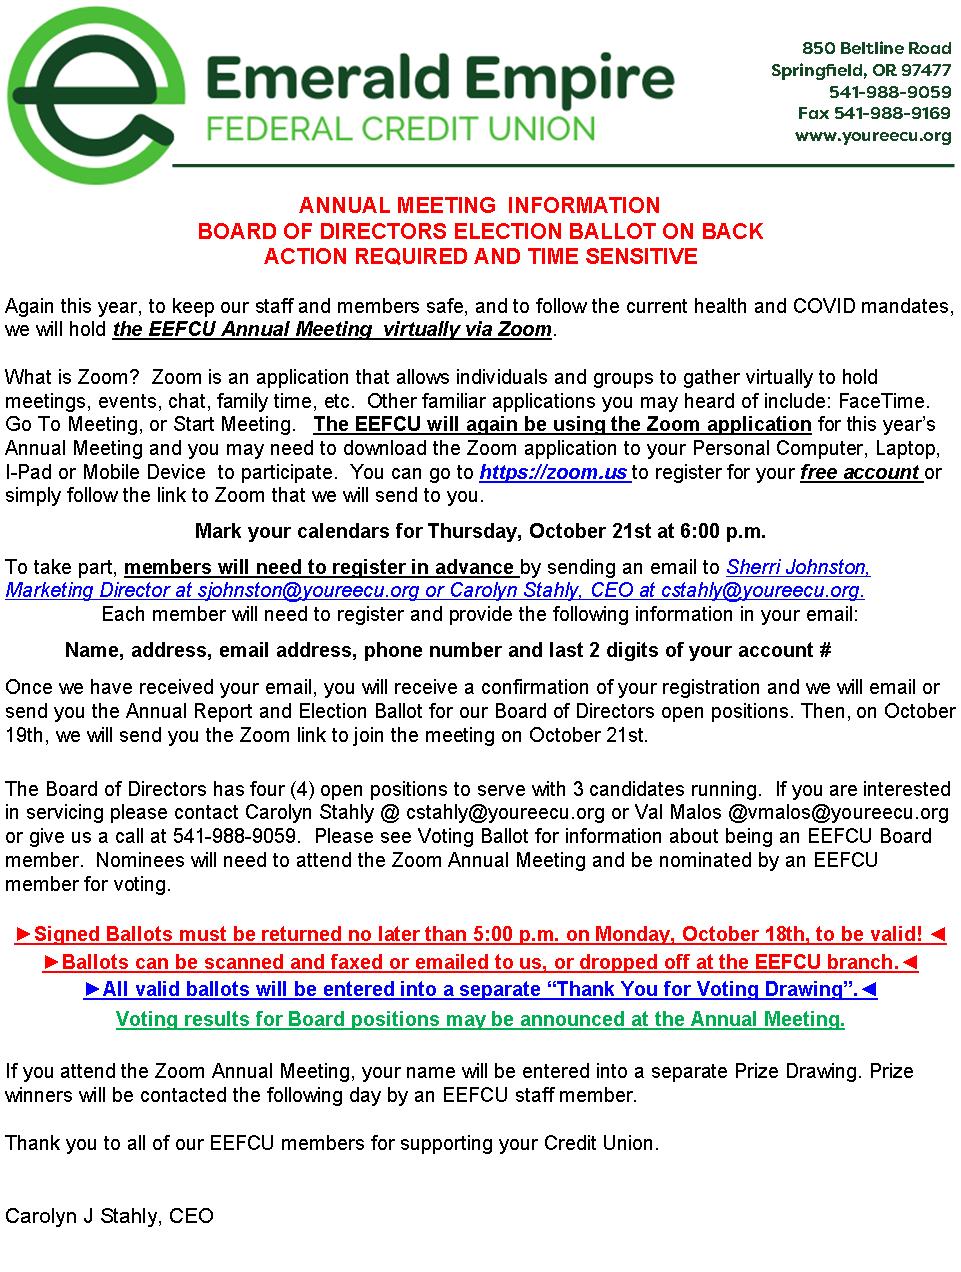 annual meeting information letter